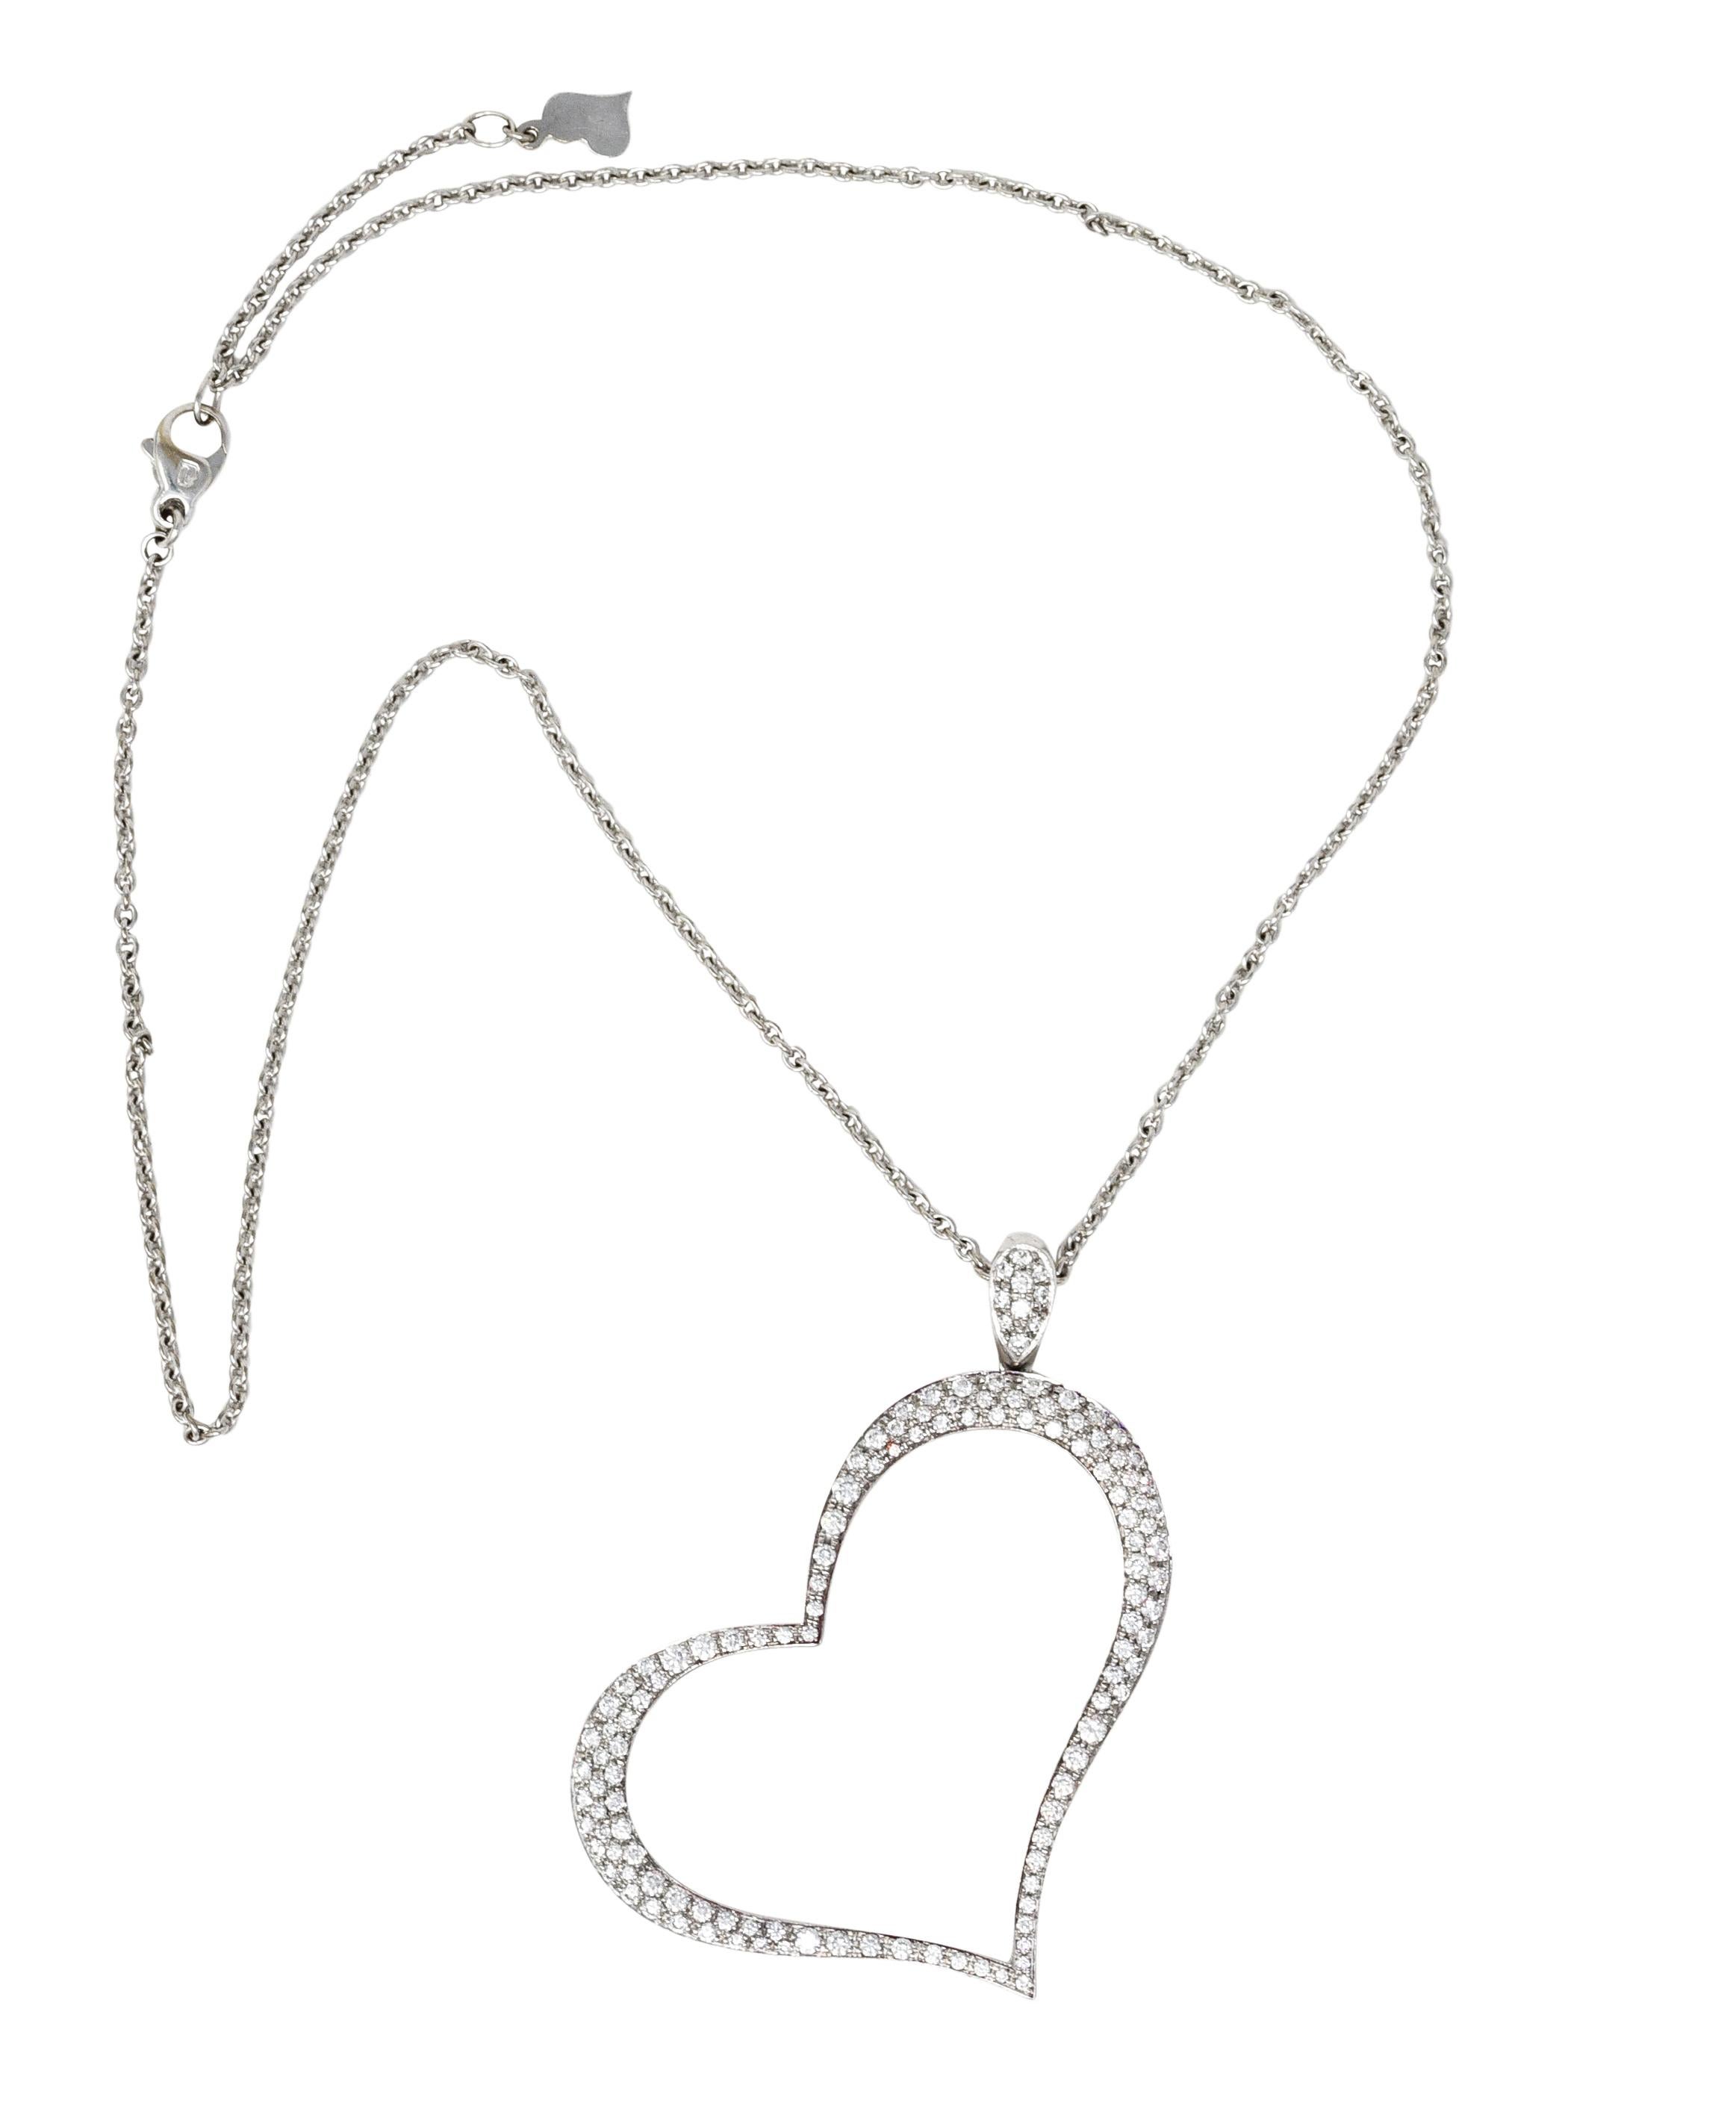 Curb chain necklace suspends a large open heart pendant. Pavé set throughout by round brilliant cut diamonds. Weighing in total approximately 1.53 carats - G to I color with VS clarity. Completed by lobster clasp and logo link heart. Chain and